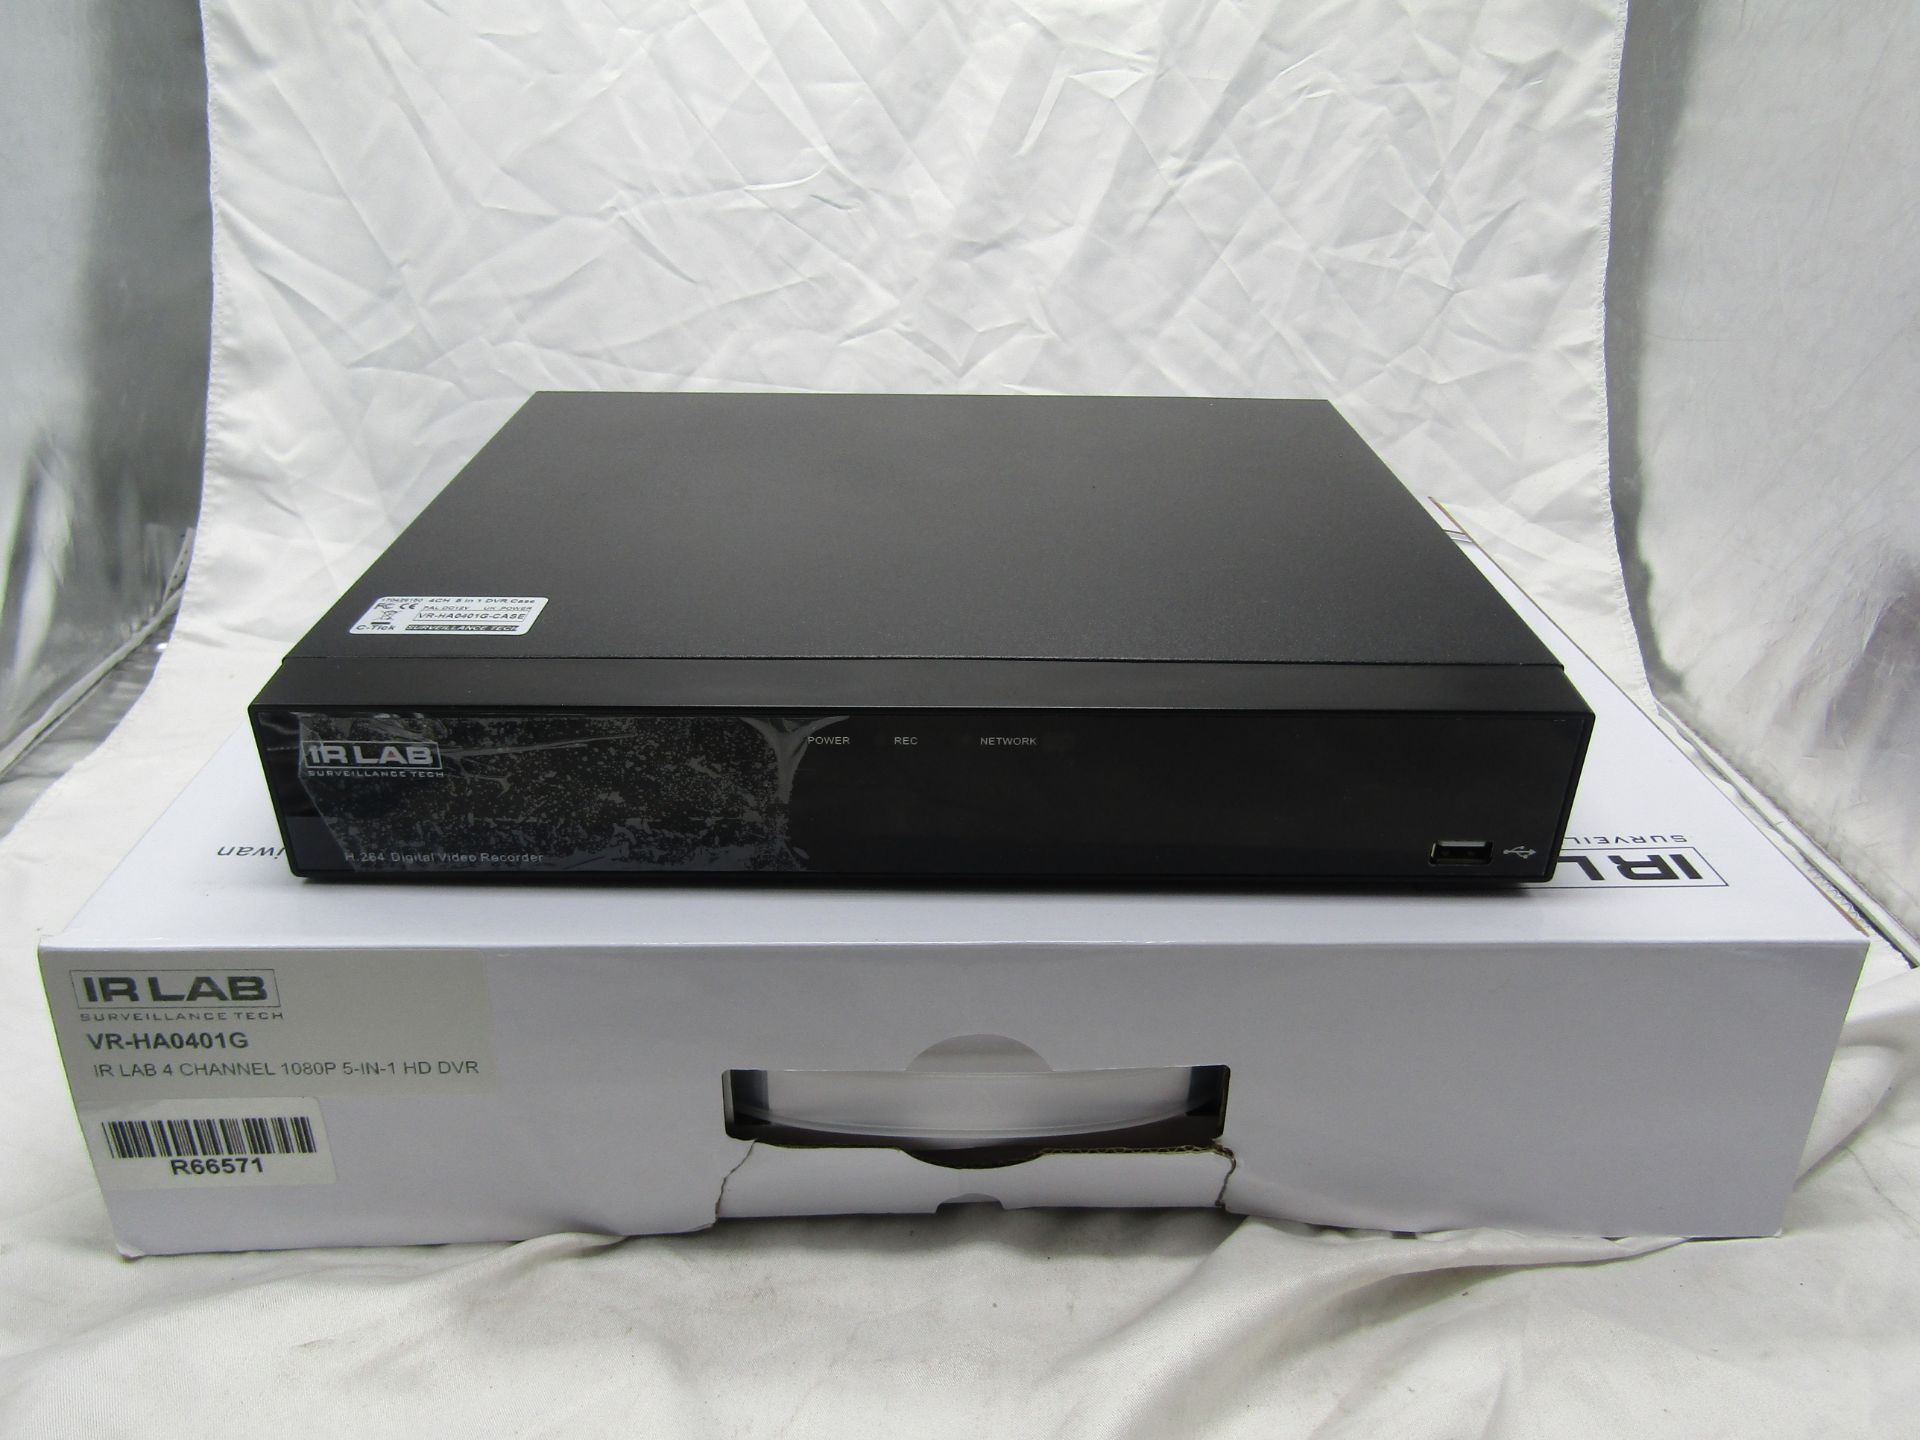 one lot of over 200 items of CCTV and Surveillance equipment, includes DVRs, Cameras, Thermal - Image 6 of 104